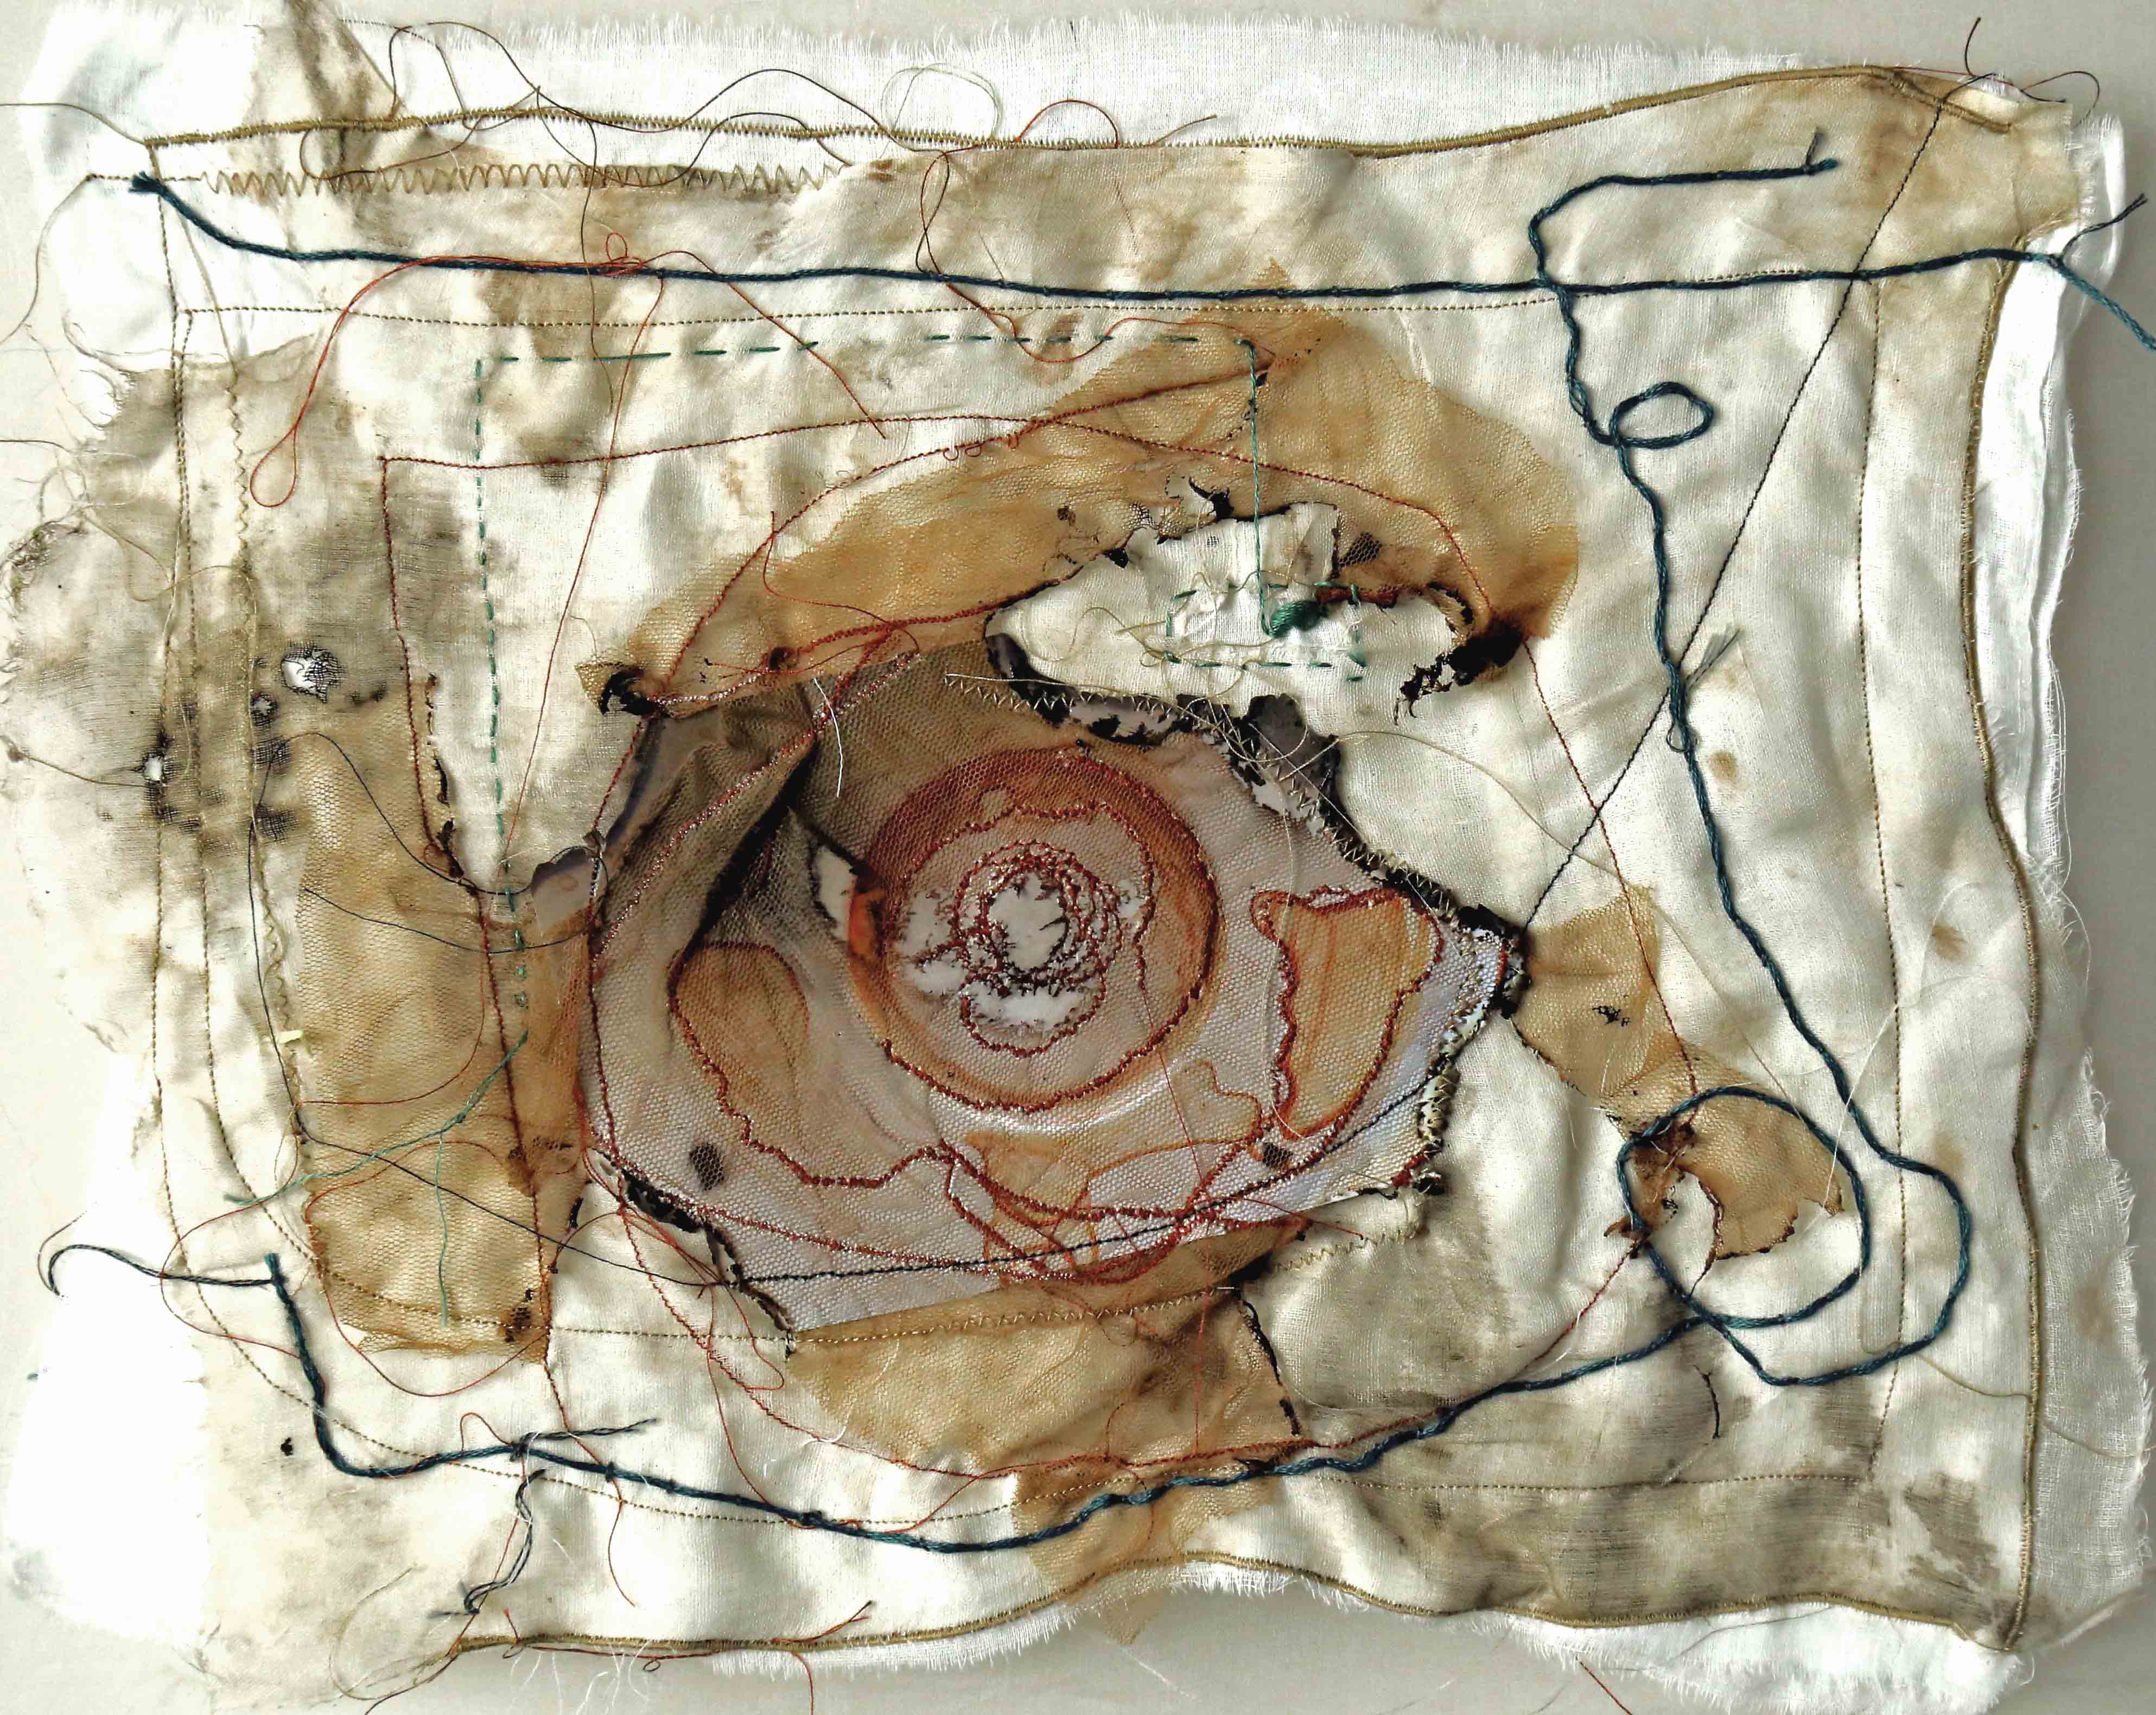 Ember Remains, 2015, [10 x 12 inches – unframed, set of three], Materials: photographic paper, cotton fabrics, cotton floss, cotton-polyester thread, Technique: burning, layering, hand-sewing, machine embroidery, staining with tea-leaves